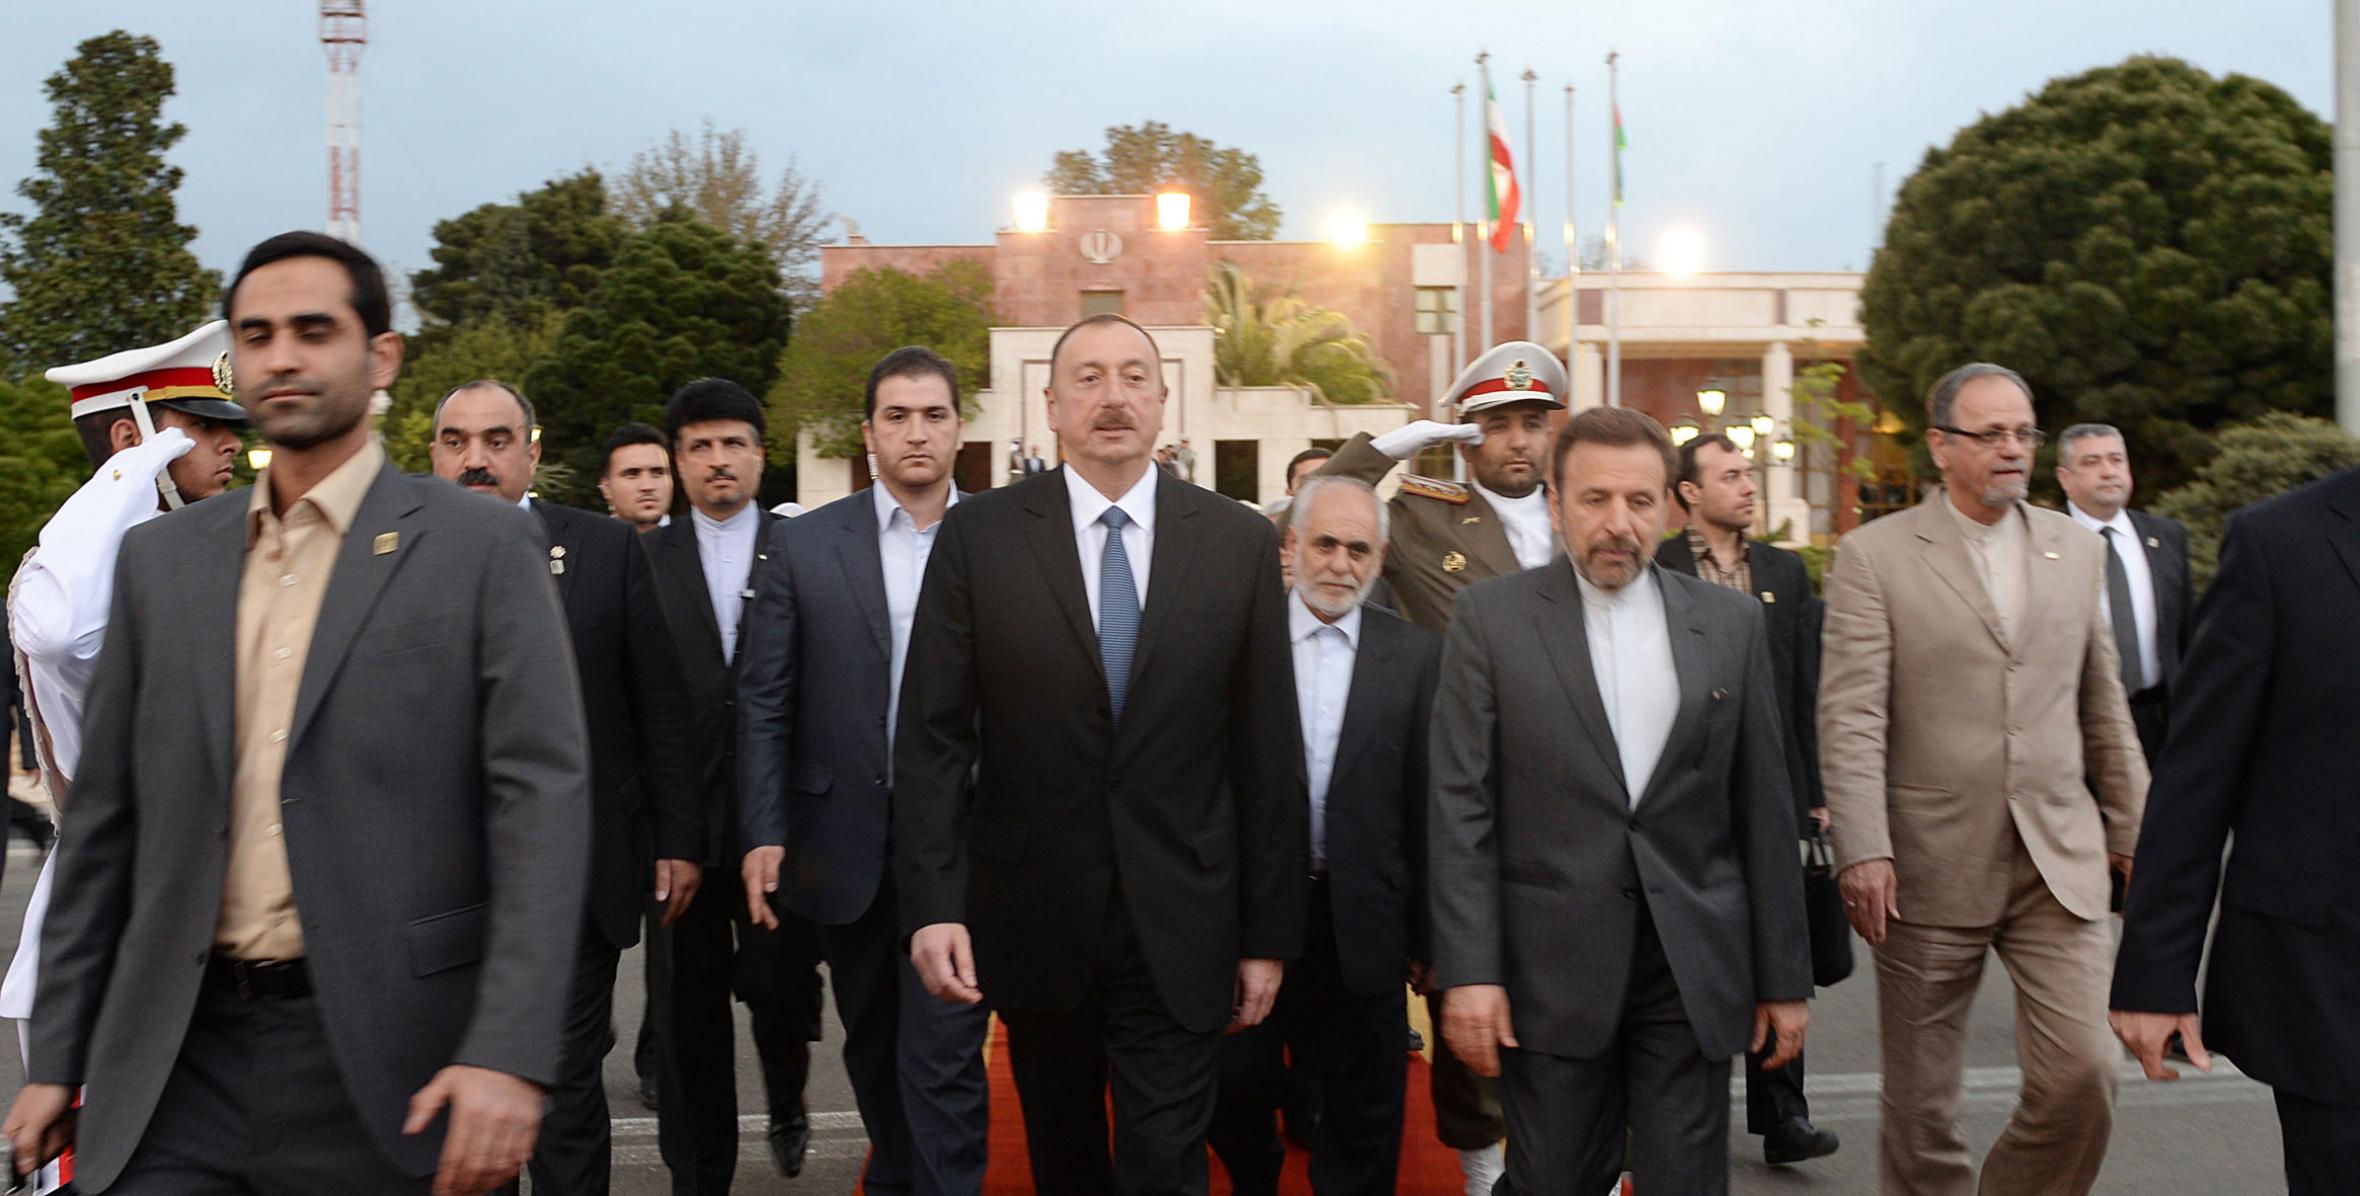 Ilham Aliyev’s official visit to Islamic Republic of Iran has ended